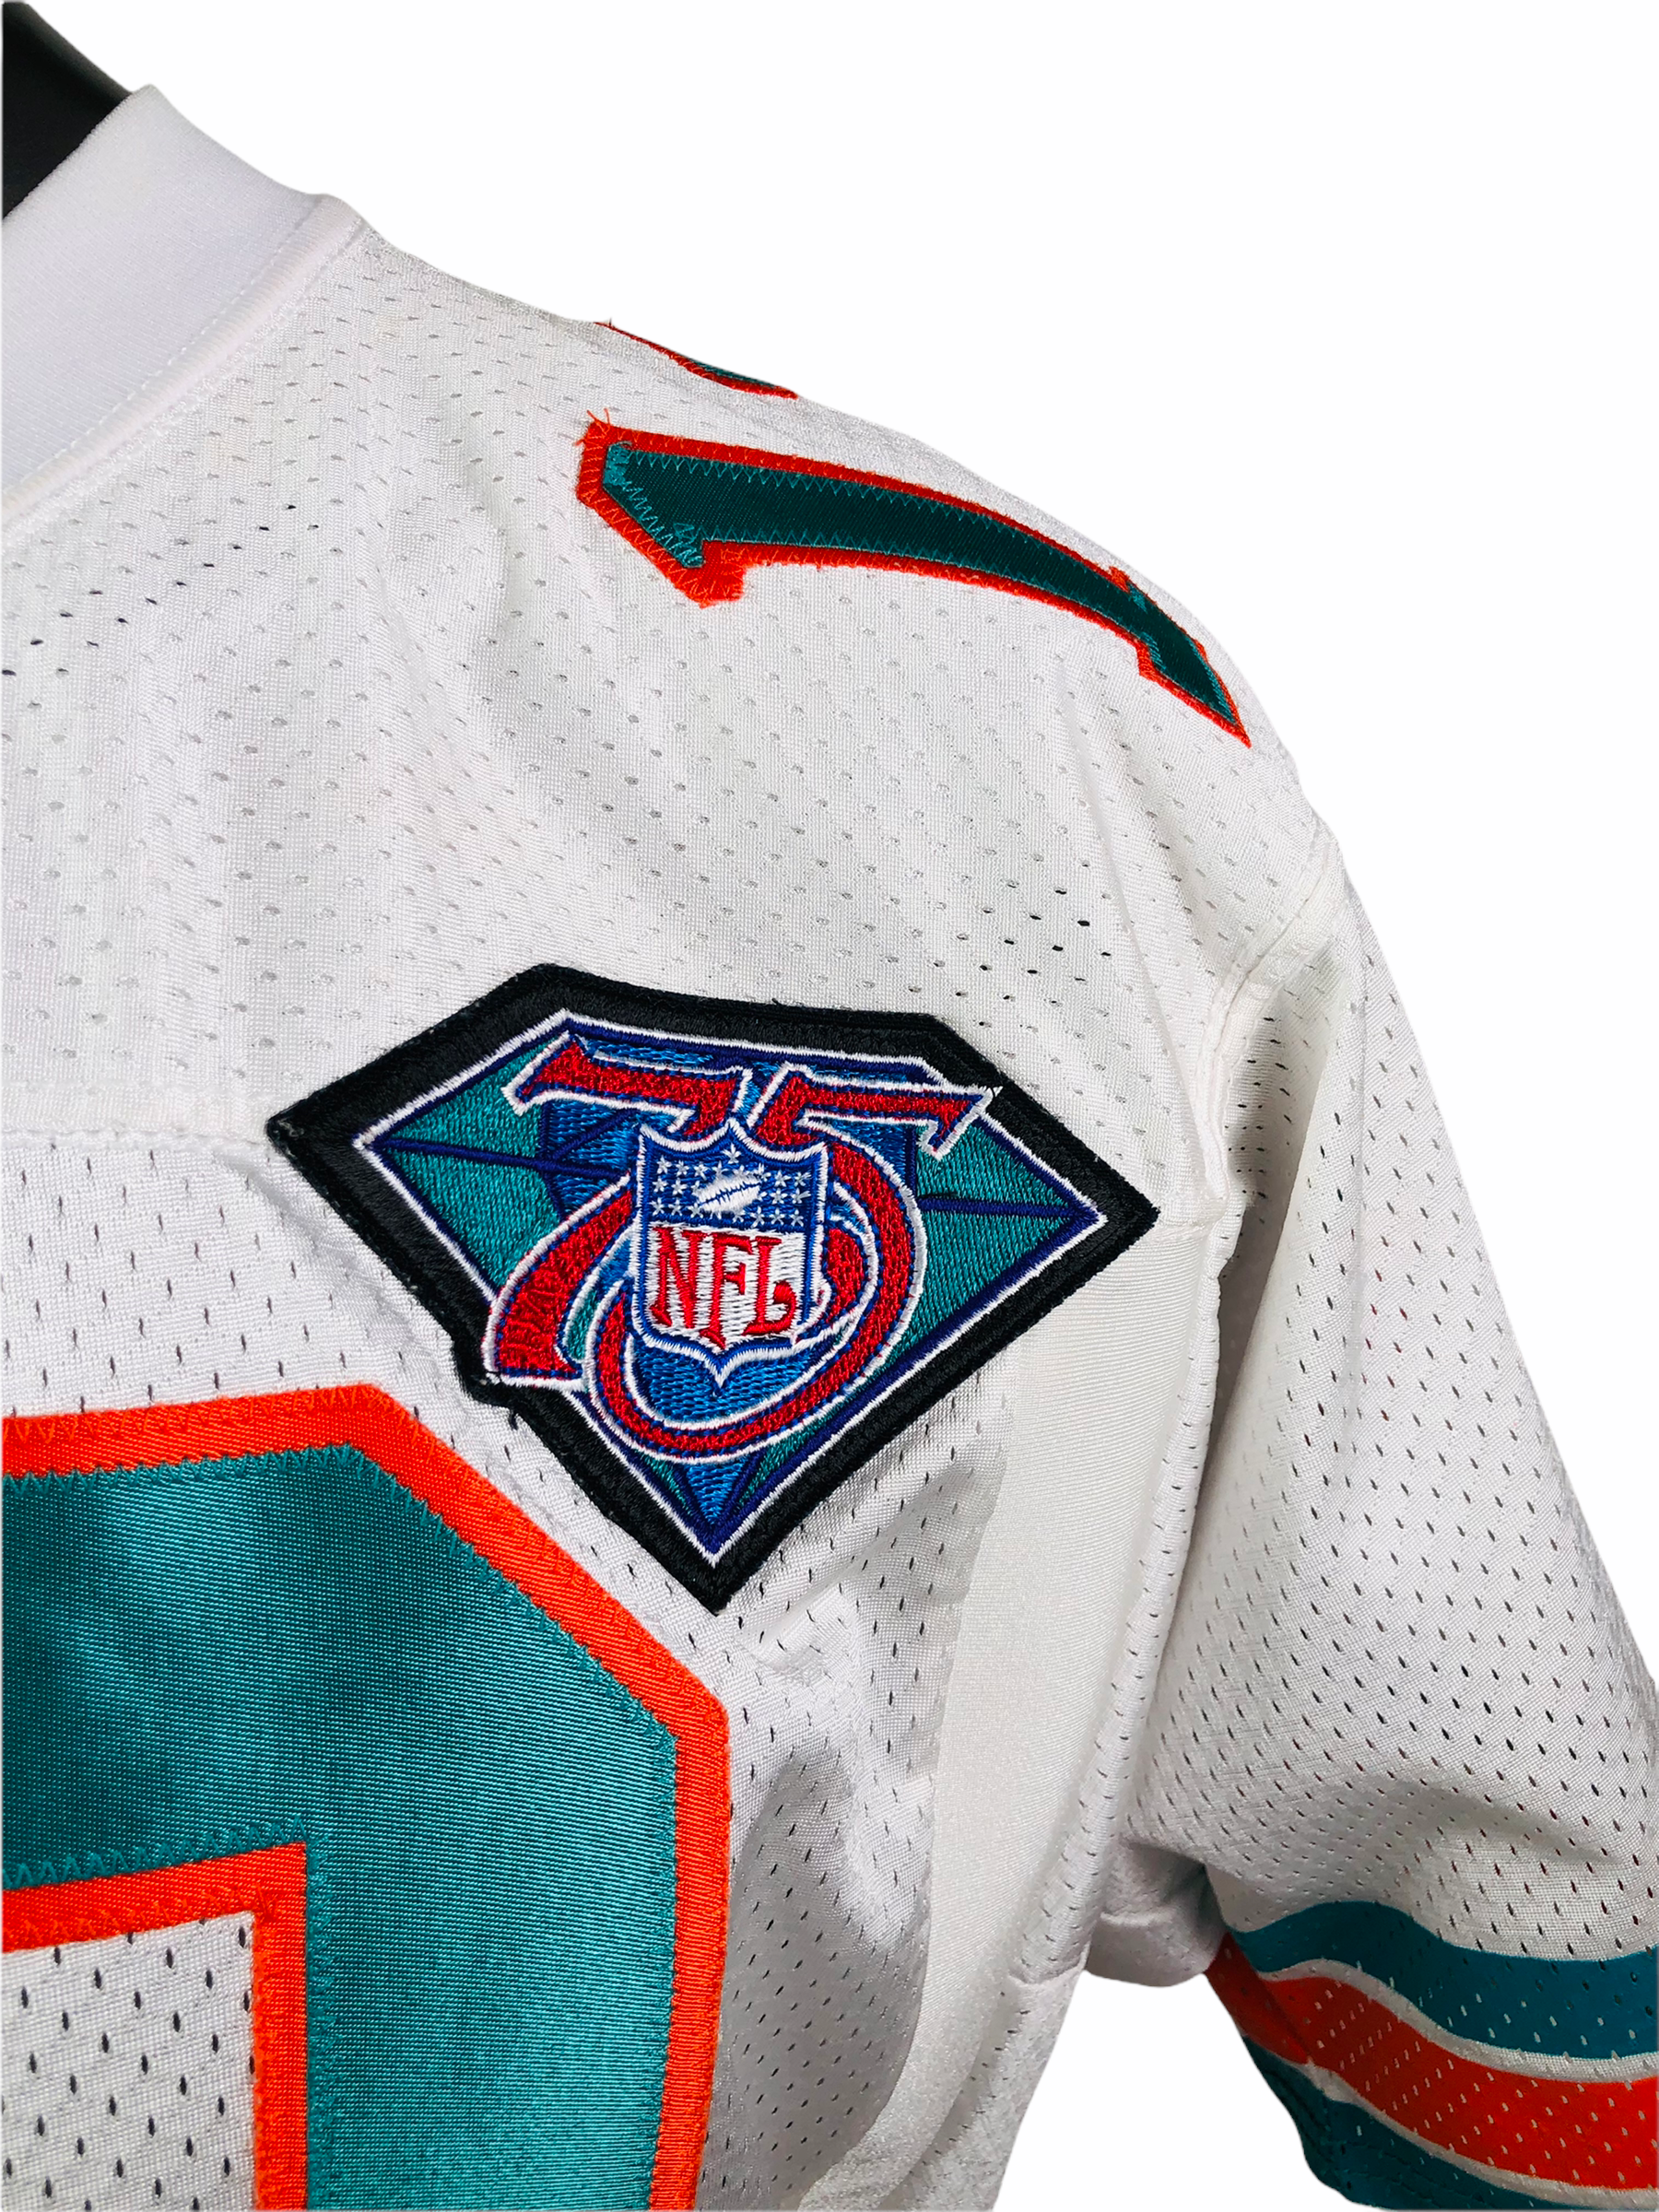 NFL Miami Dolphins 1994 Dan Marino Authentic Throwback Jersey 